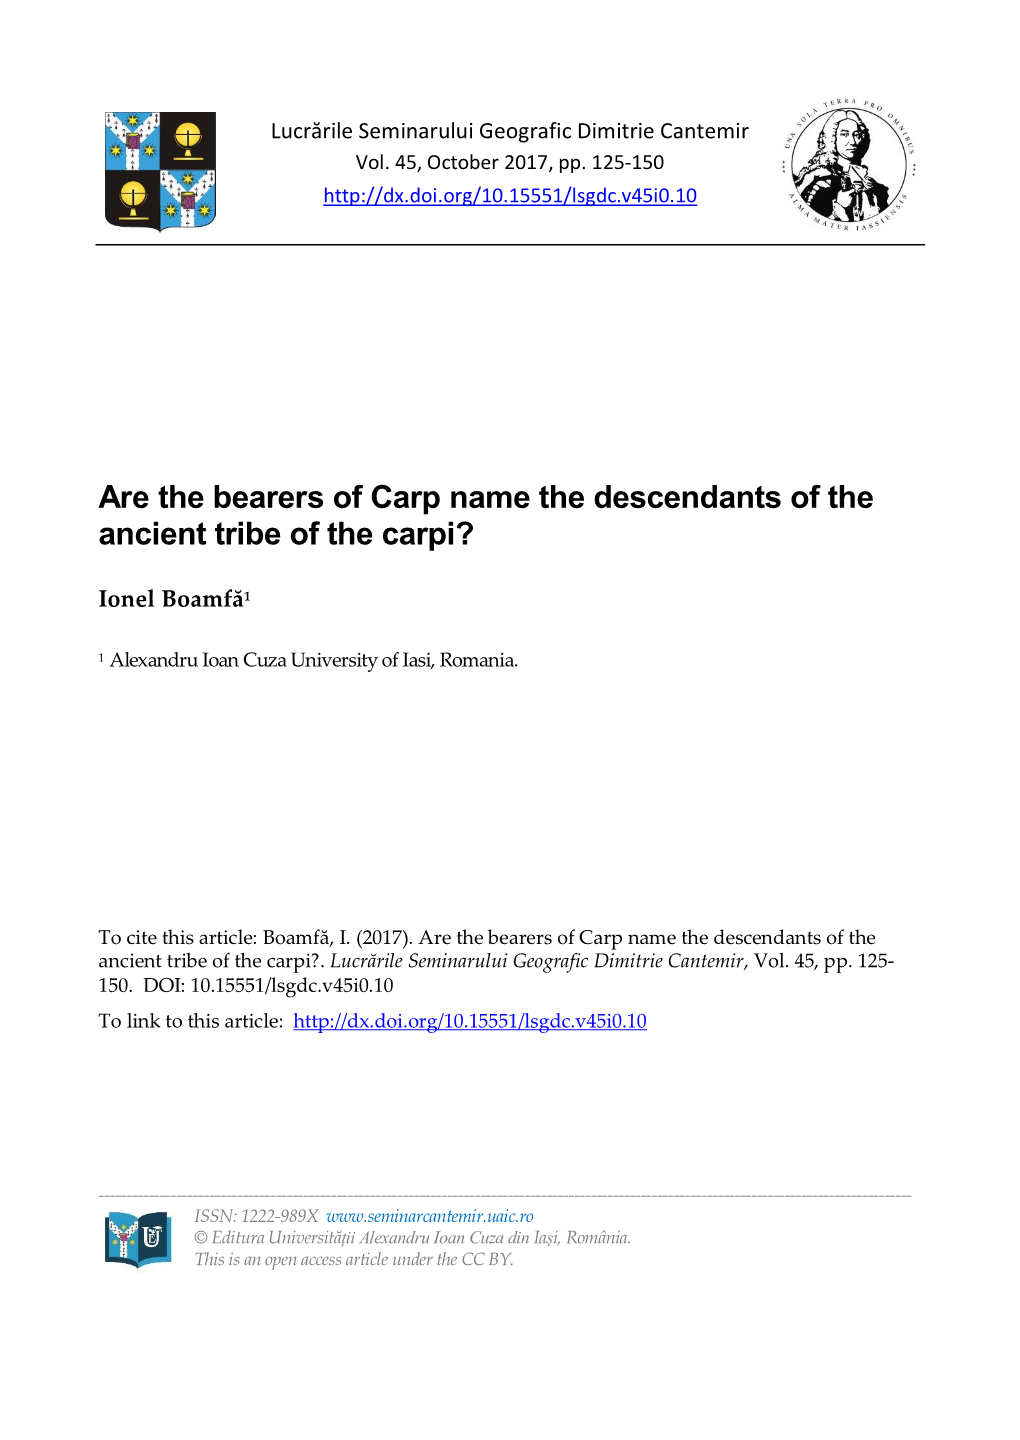 Are the Bearers of Carp Name the Descendants of the Ancient Tribe of the Carpi?